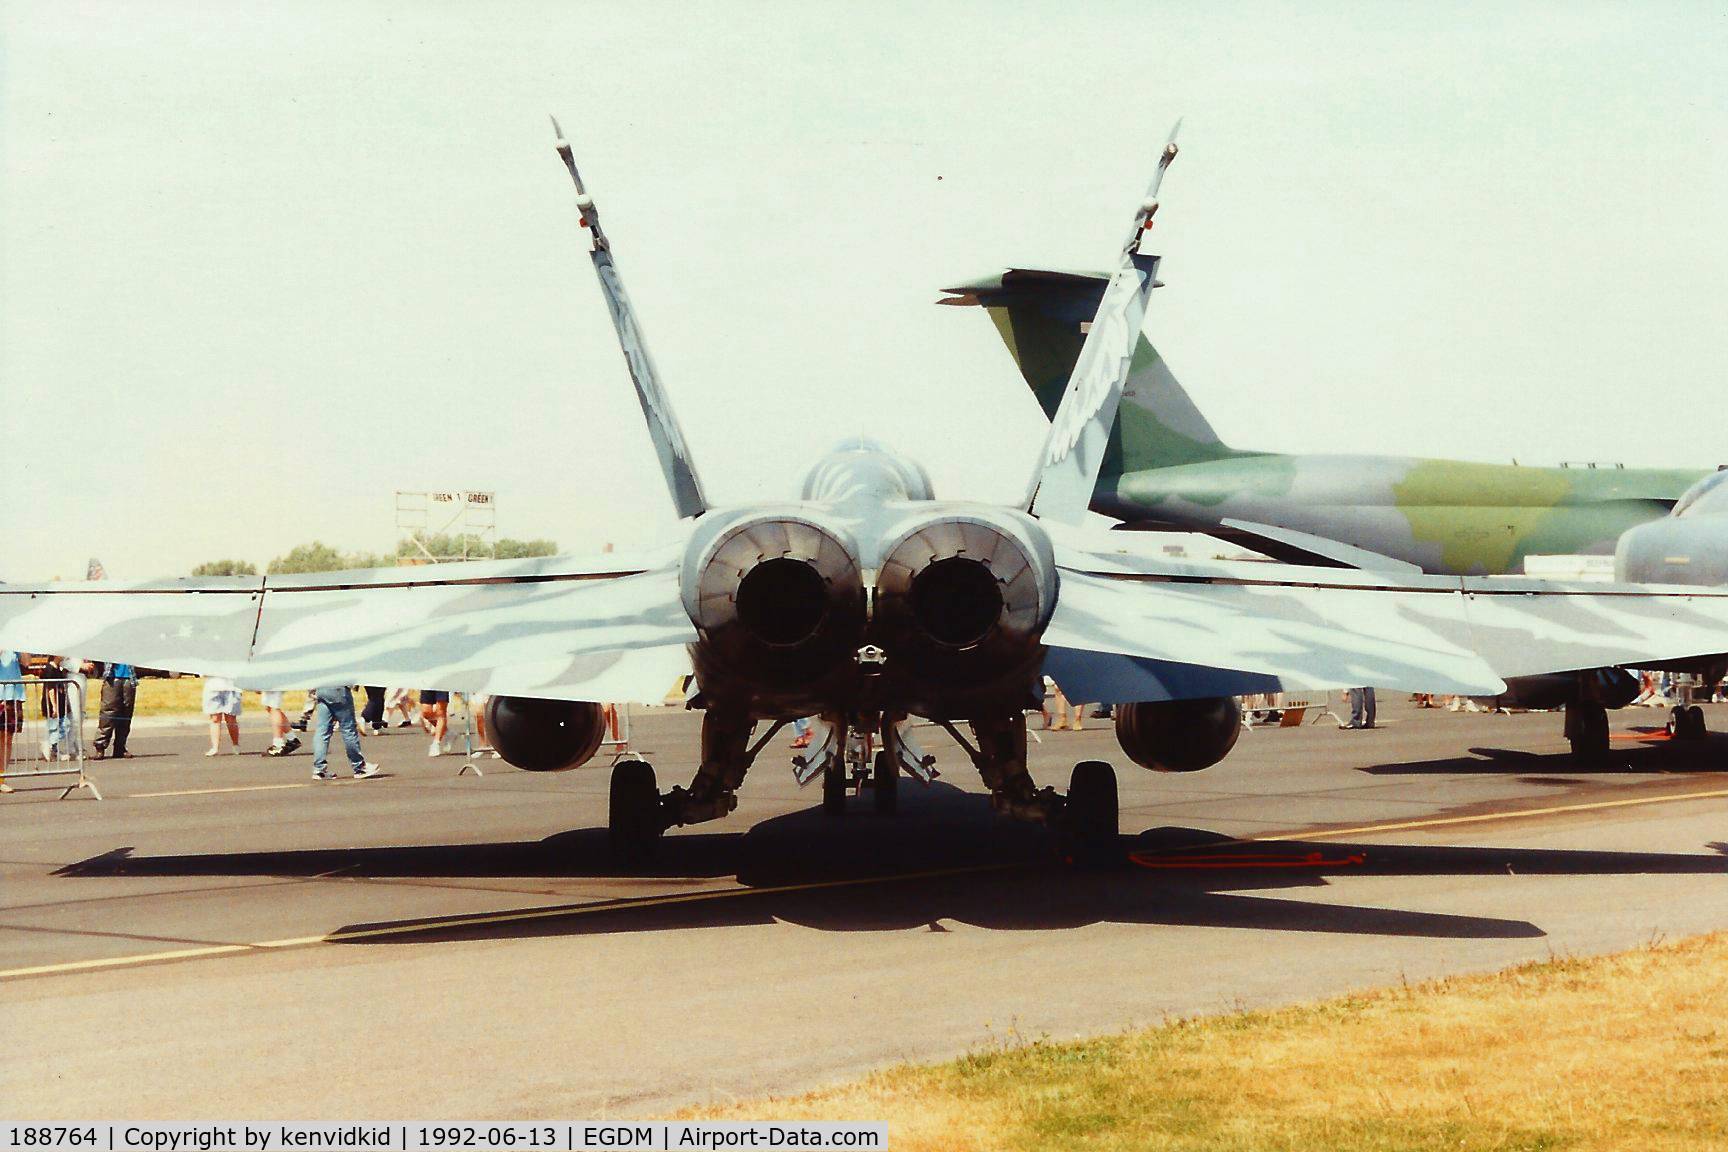 188764, 1986 McDonnell Douglas CF-188A Hornet C/N 0440/A361, At Boscombe Down, scanned from print.